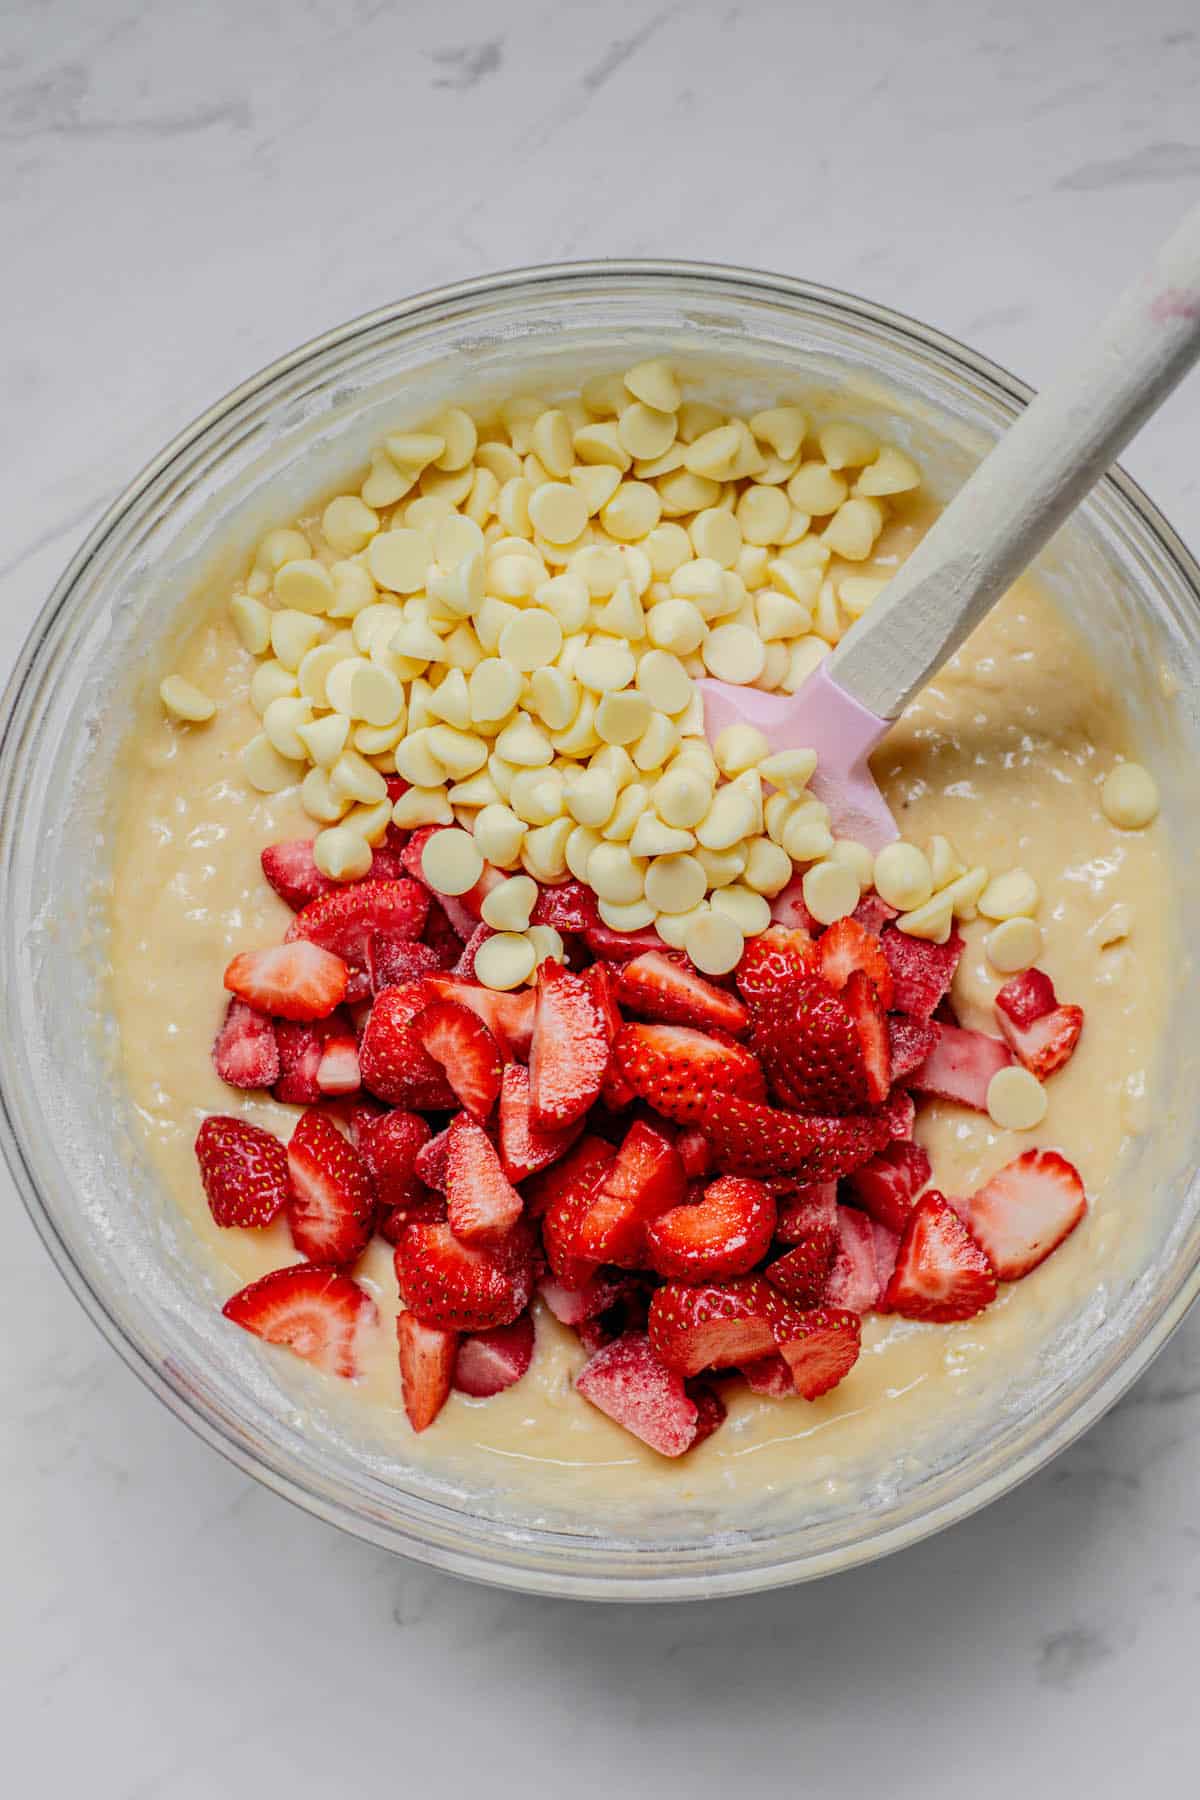 White chocolate and chopped strawberries in batter.